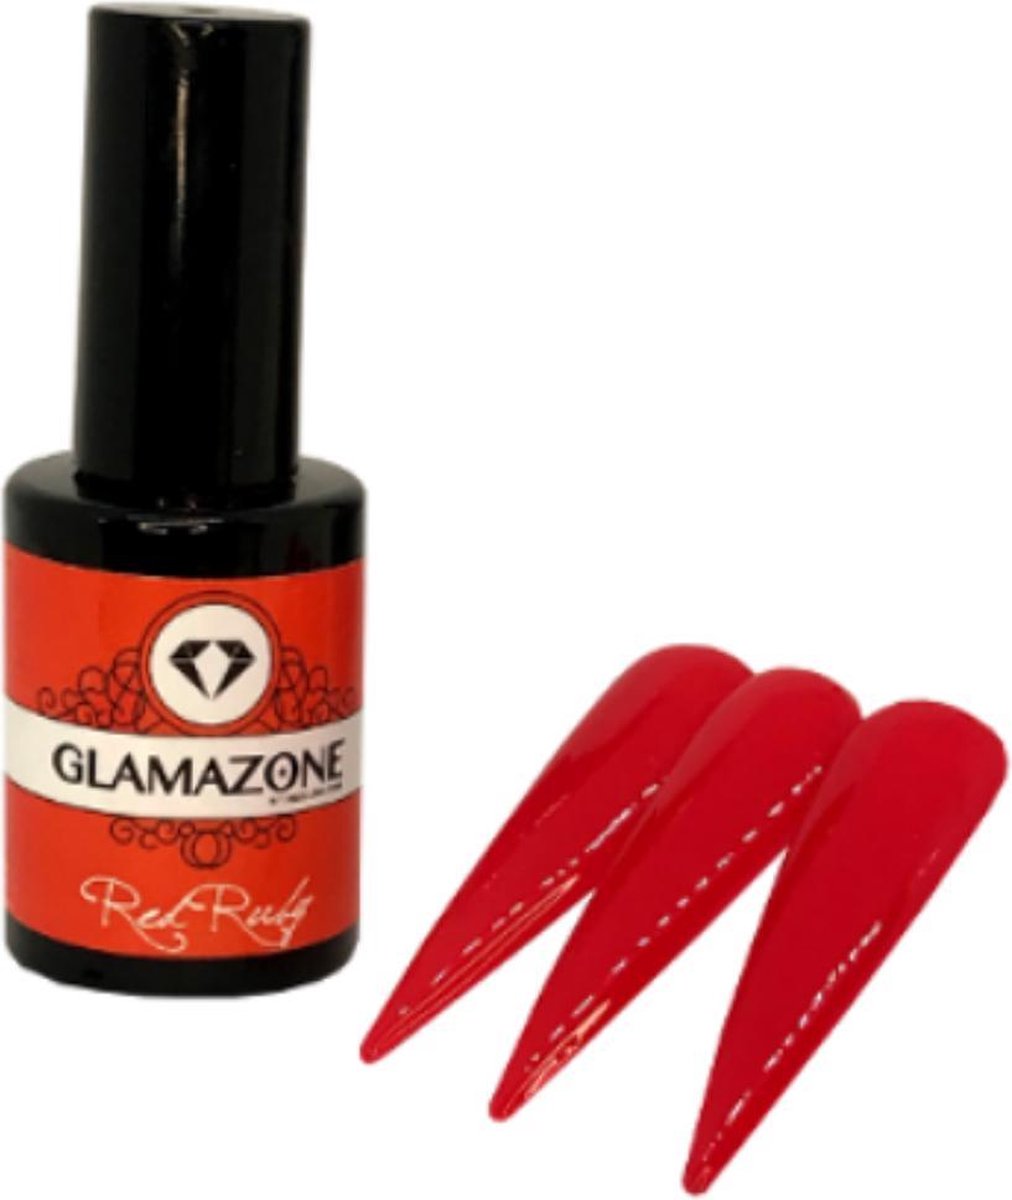 Nail Creation Glamazone - Red Ruby